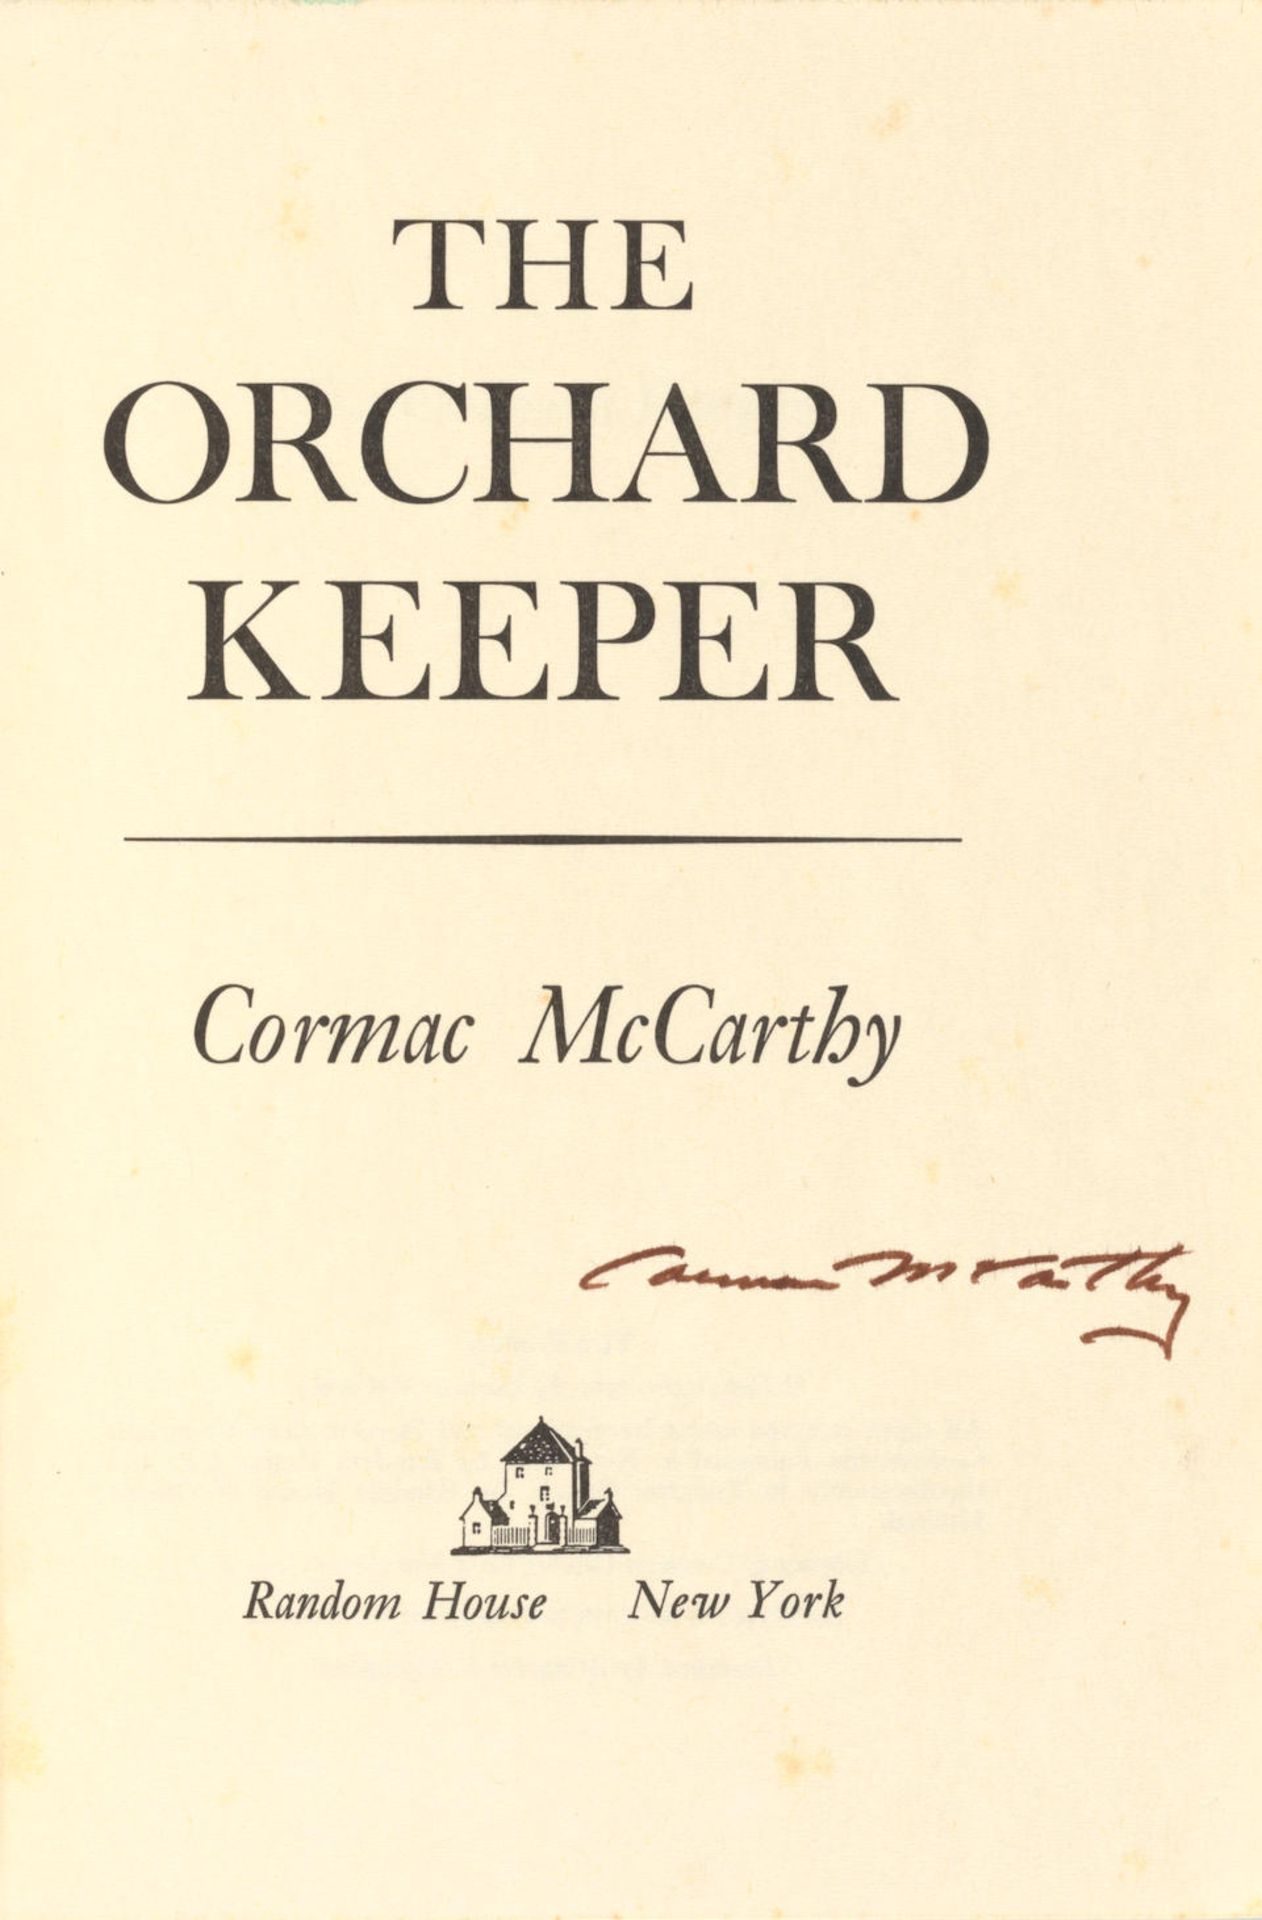 SIGNED FIRST EDITION FROM THE COLLECTION OF ANNIE DELISLE. MCCARTHY, CORMAC. 1933-2023. The Orch...